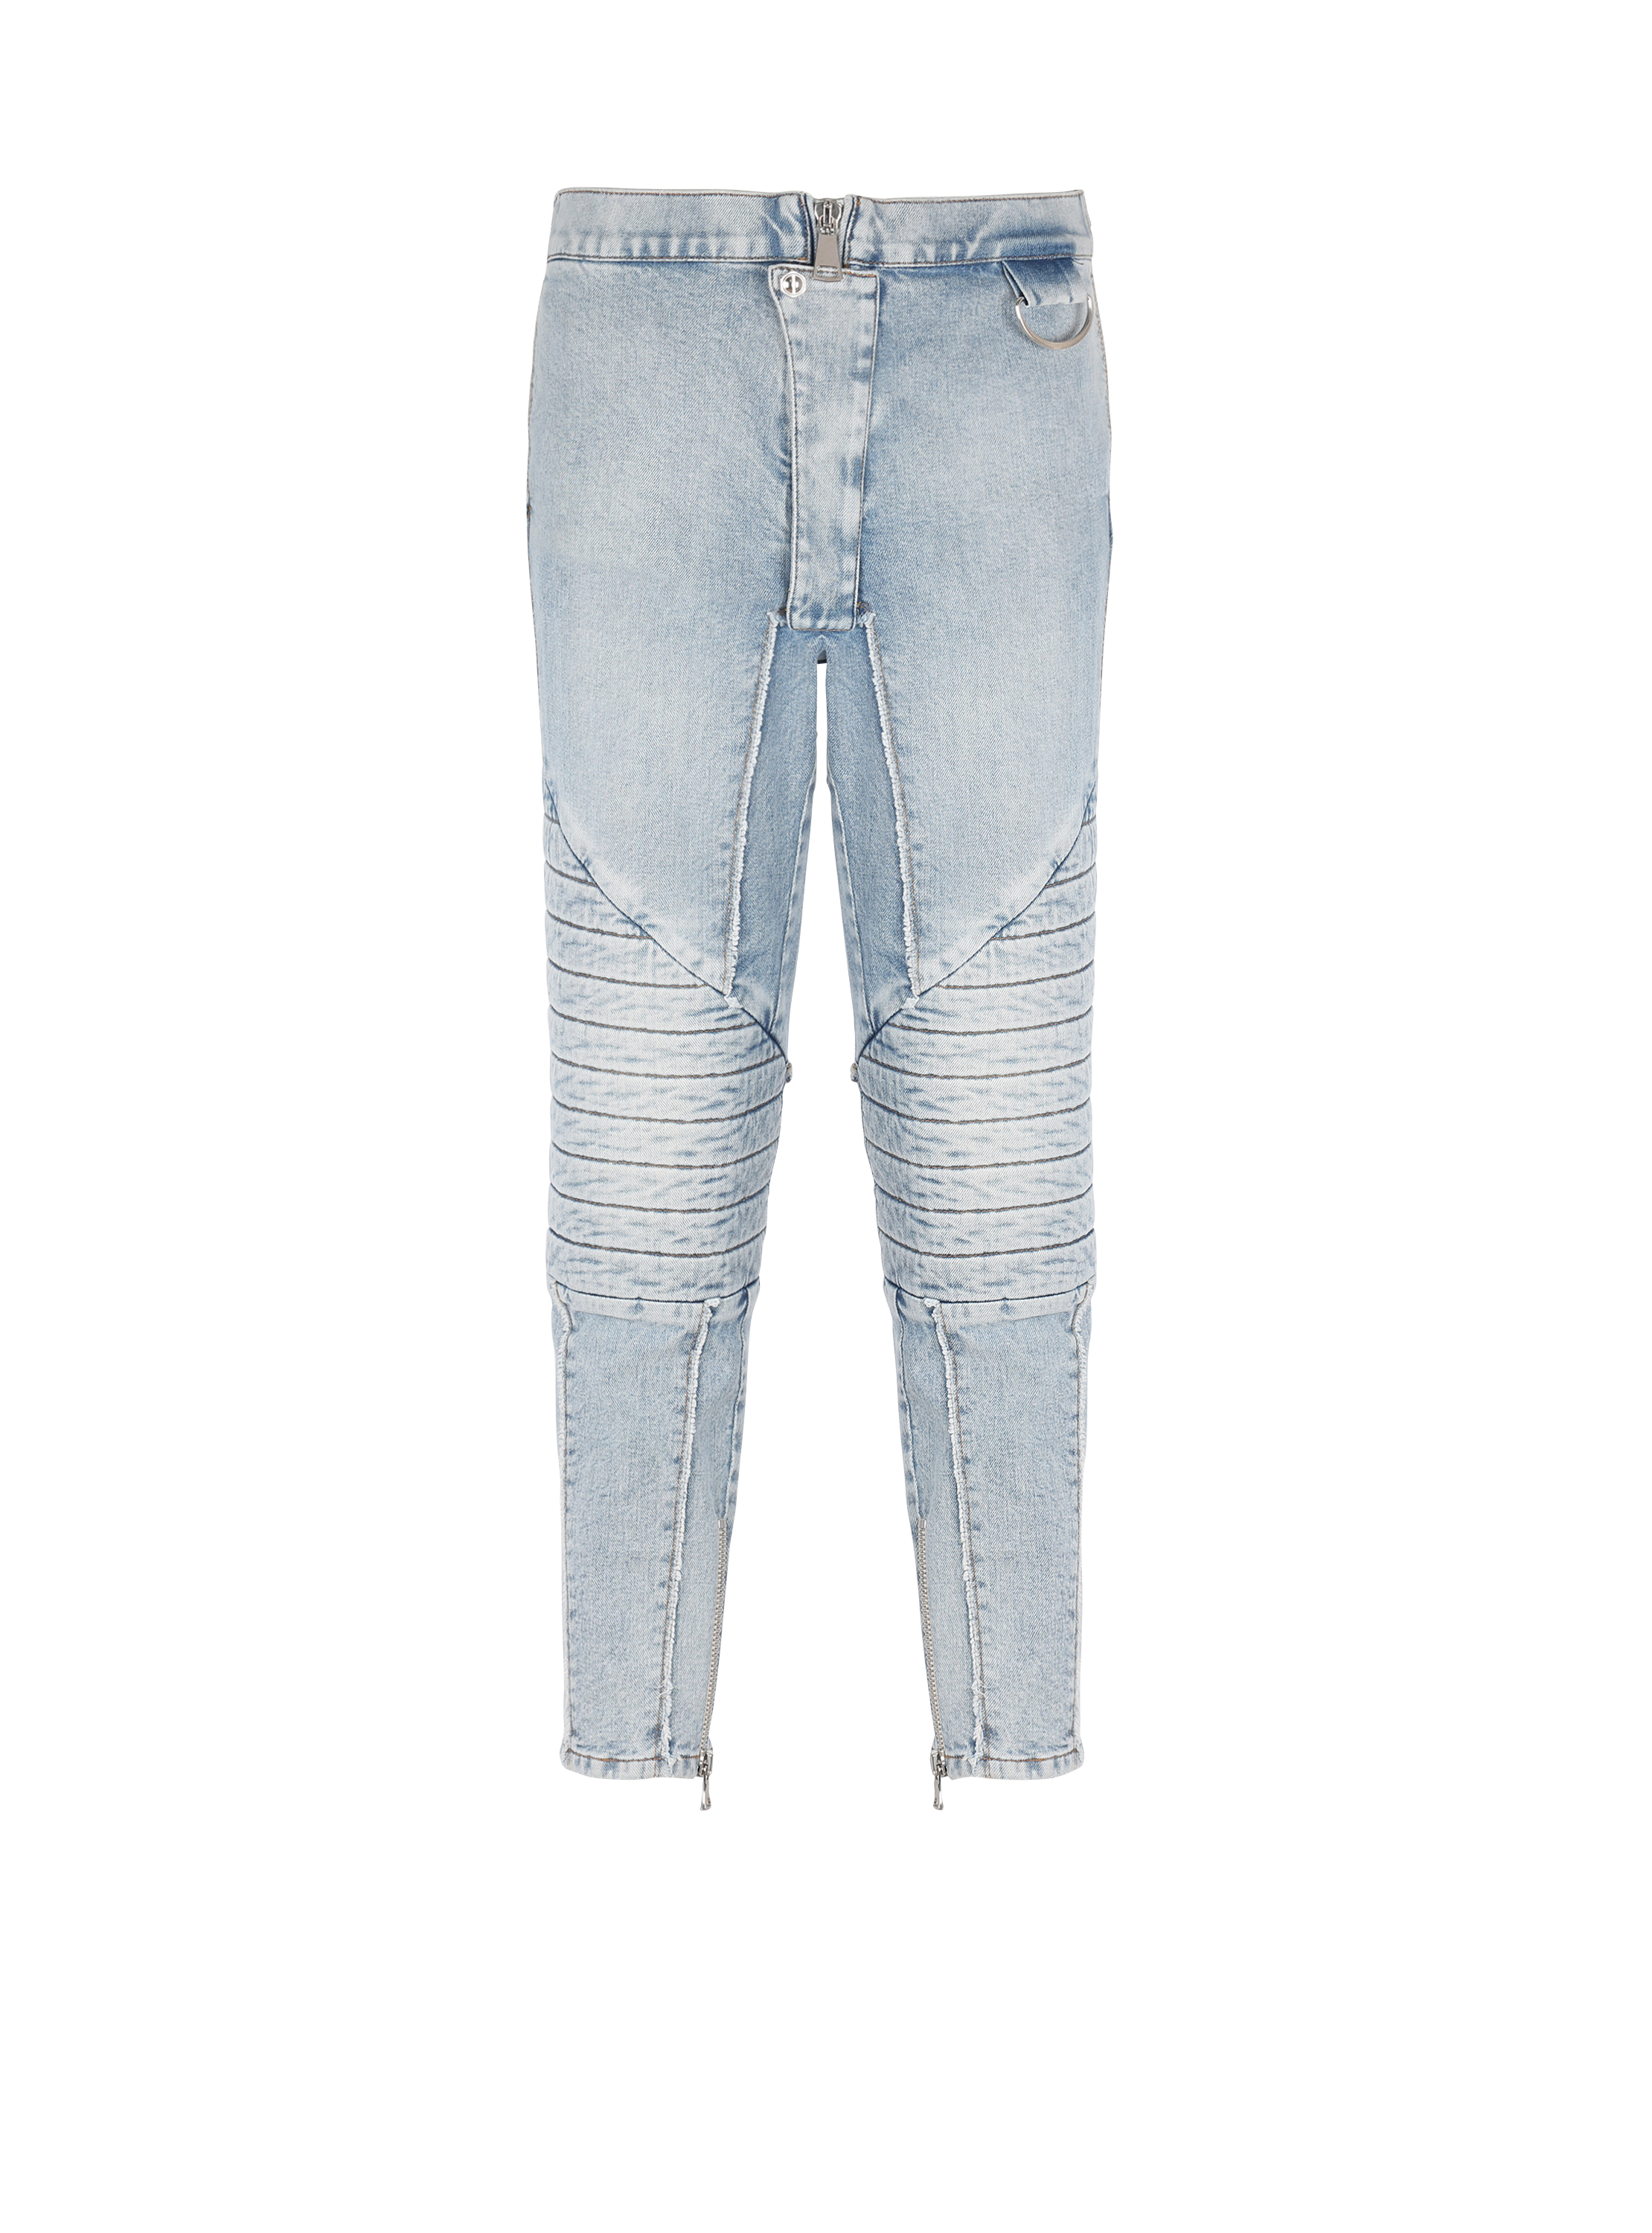 Save 70% Balmain Denim Cropped Tapered Embossed Jeans in Blue for Men Mens Clothing Jeans Tapered jeans 